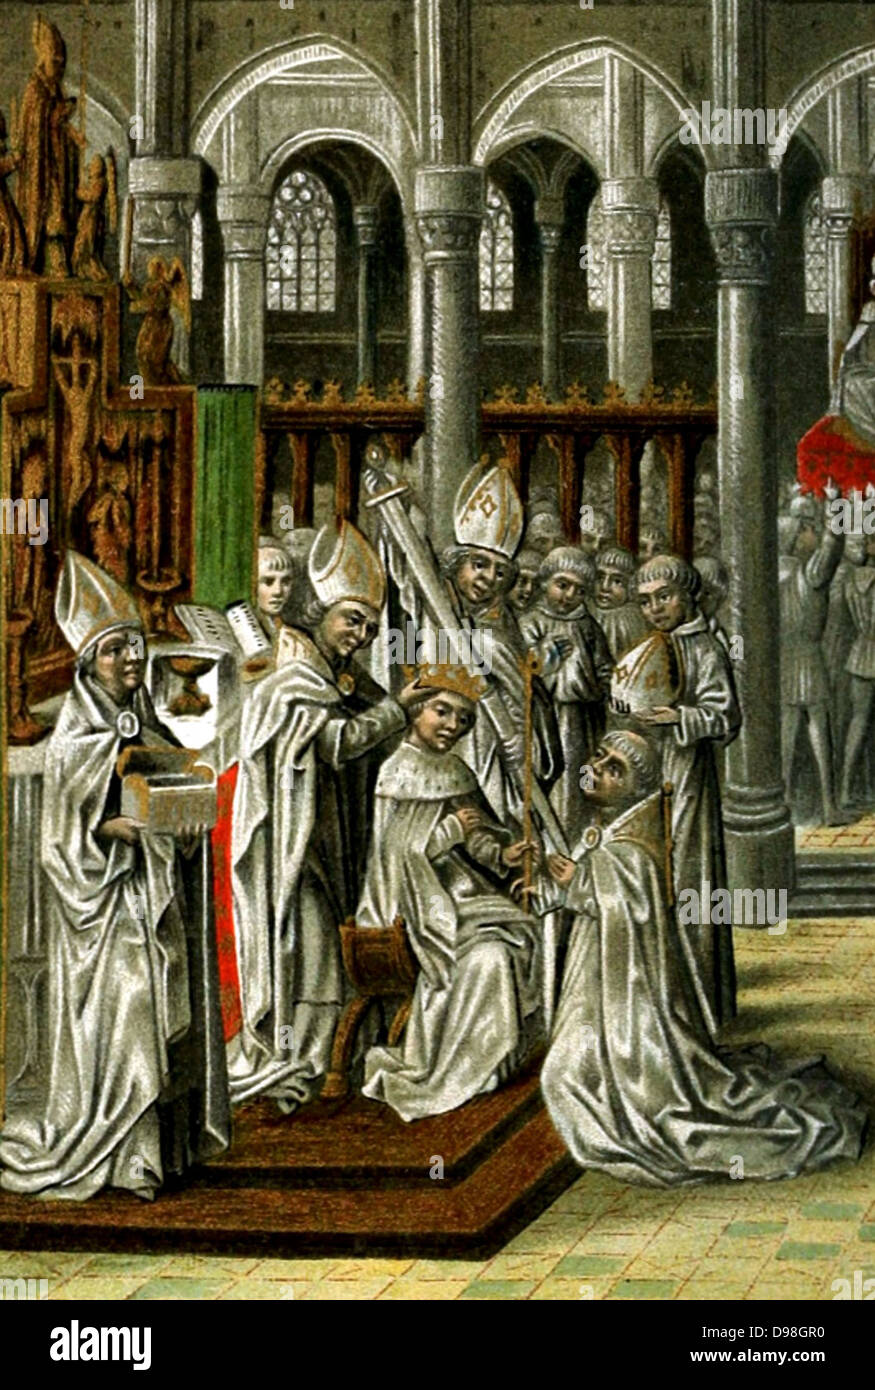 The Coronation of Henry IV of England. From 15th century manuscript of Jean Froissart's Chronicles. Henry IV ( 1366 – 1413) King of England and Lord of Ireland (1399–1413). Stock Photo